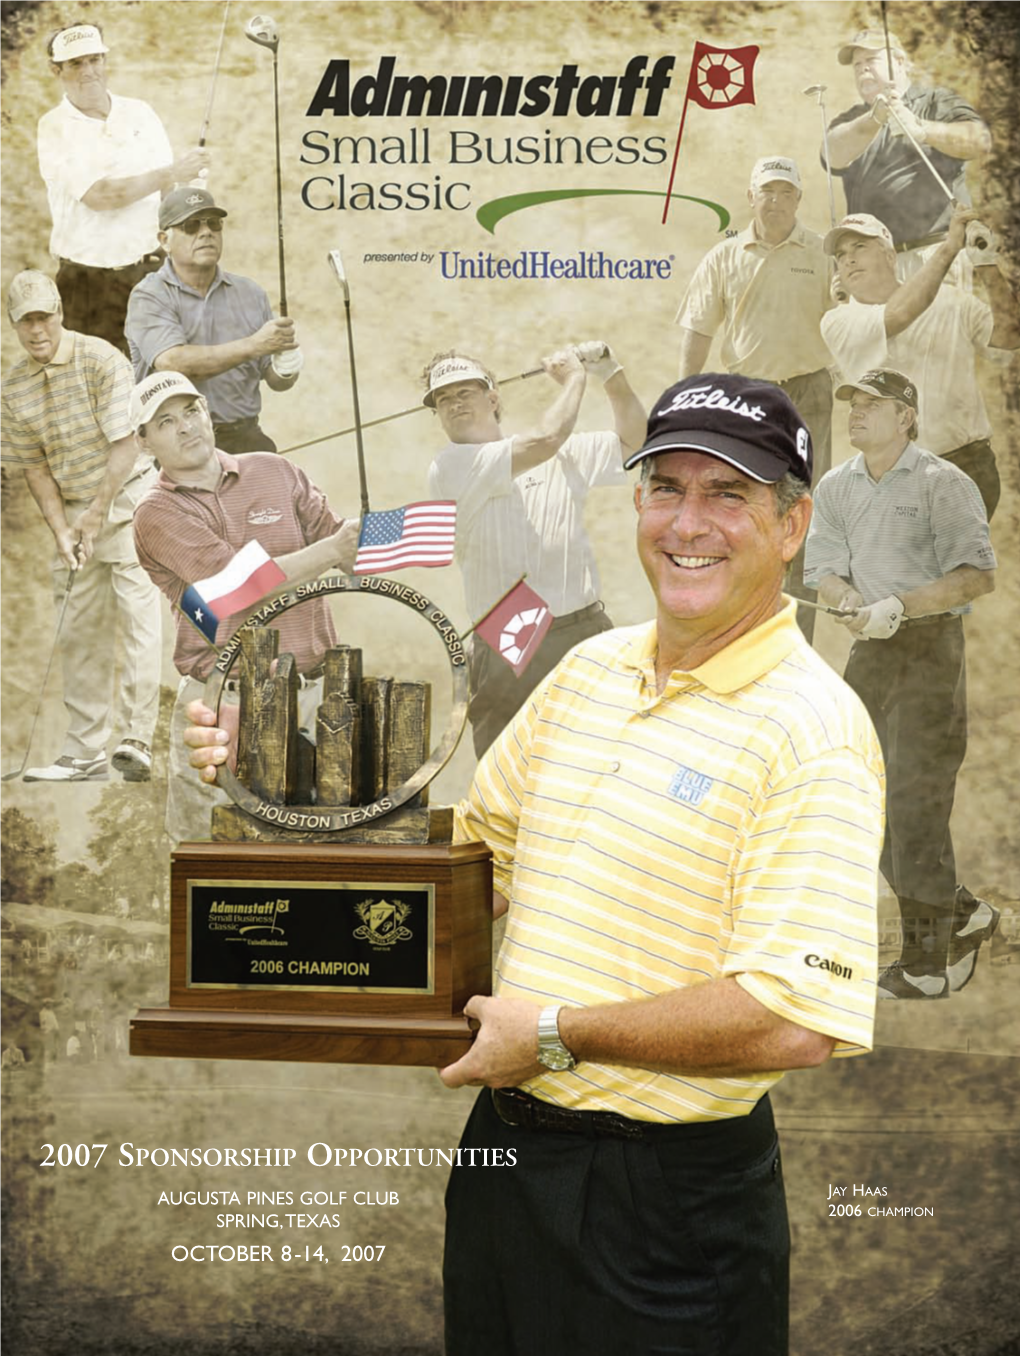 2007 Sponsorship Opportunities Augusta Pines Golf Club Jay Haas 2006 Champion Spring,Texas October 8-14, 2007